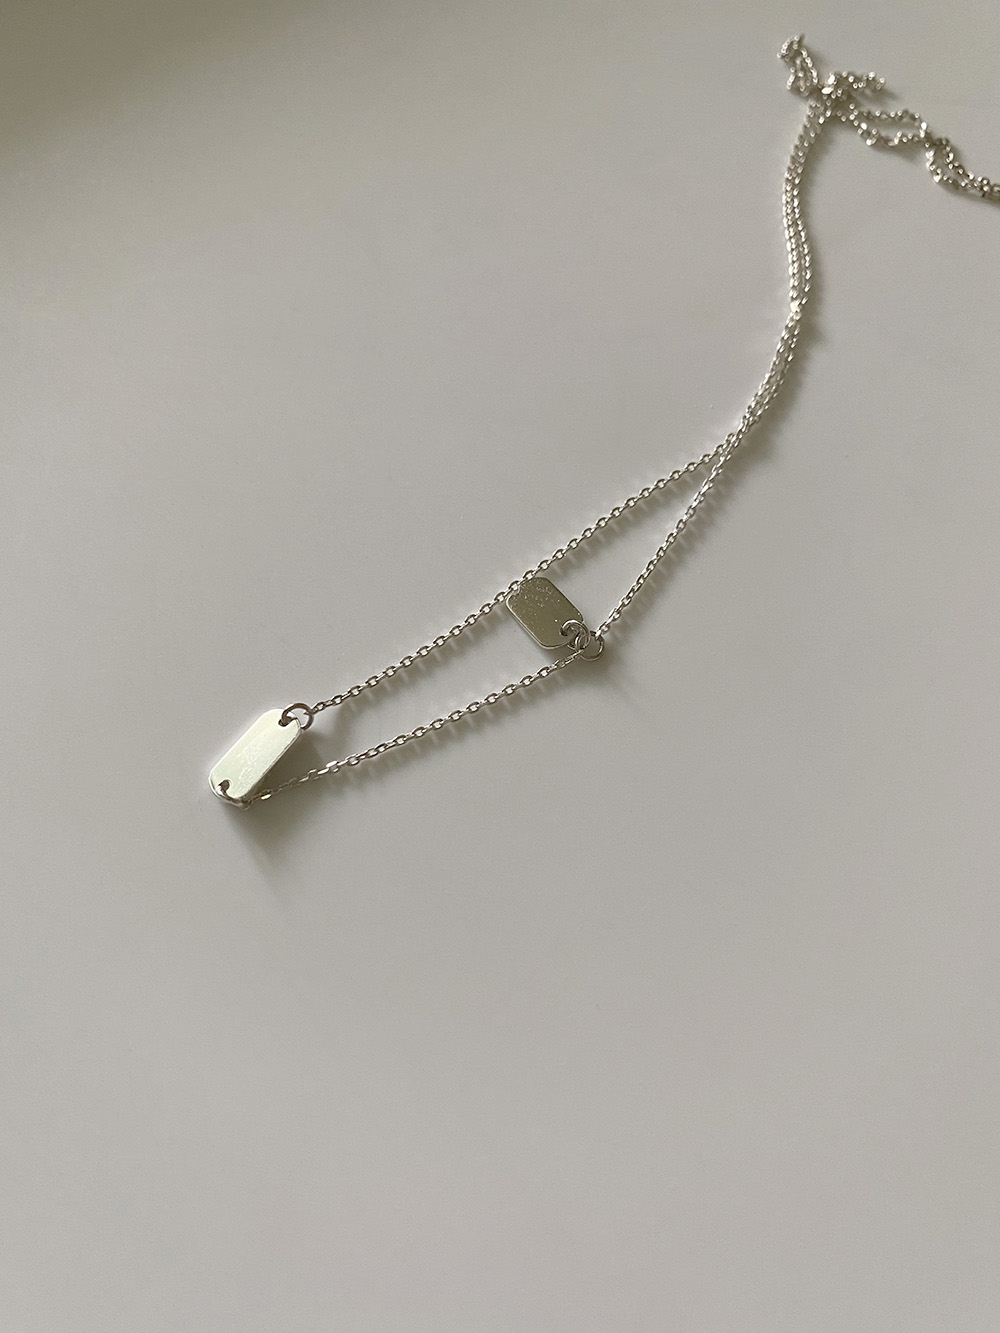 [92.5 silver] tag neacklace